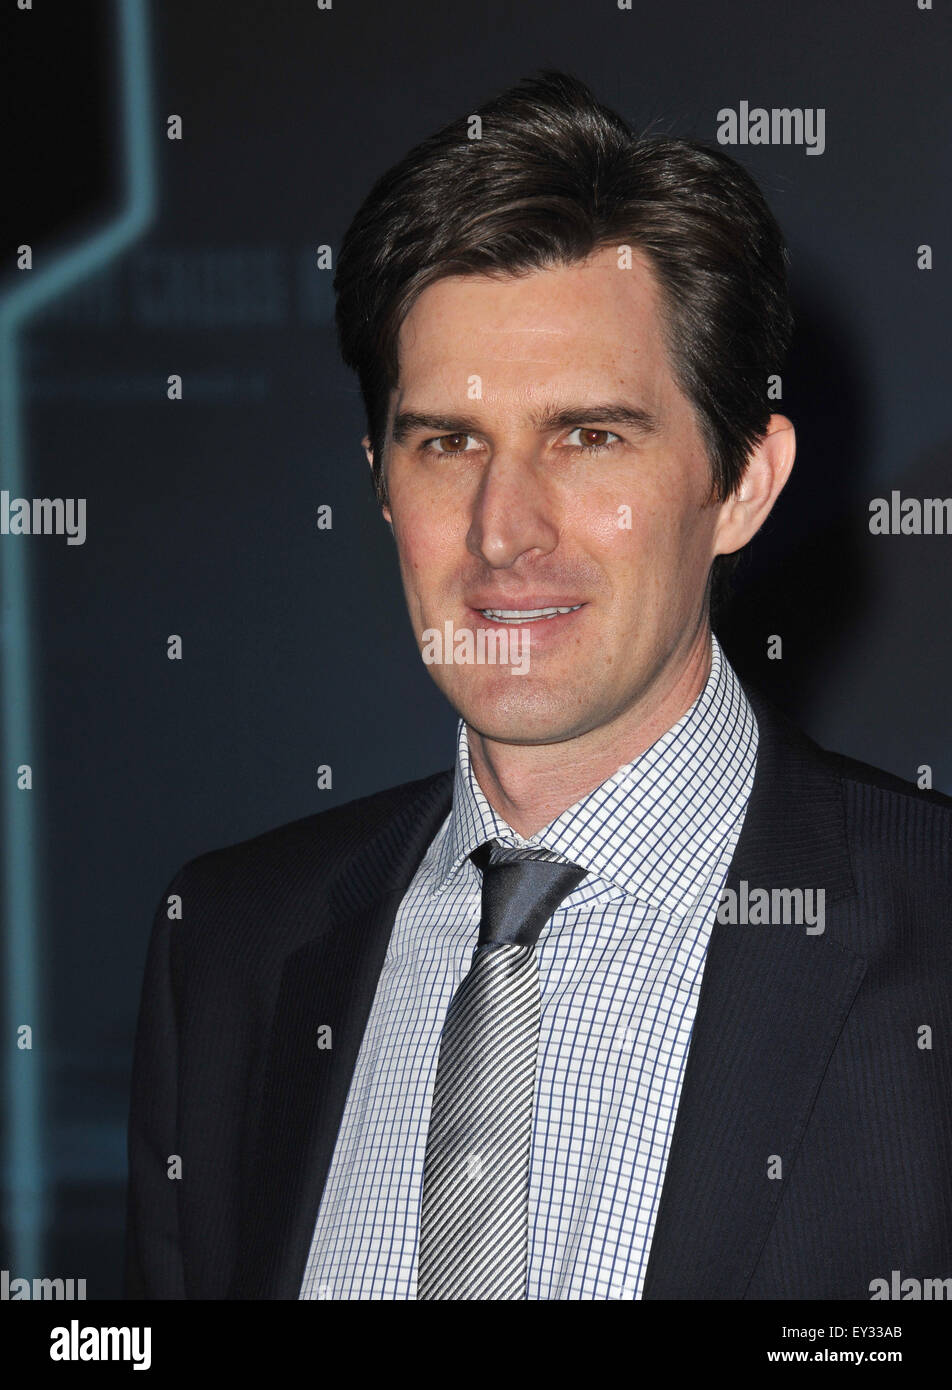 LOS ANGELES, CA - DECEMBER 11, 2010: Director Joseph Kosinski at the world premiere of his new movie 'Tron: Legacy' at the El Capitan Theatre, Hollywood. Stock Photo